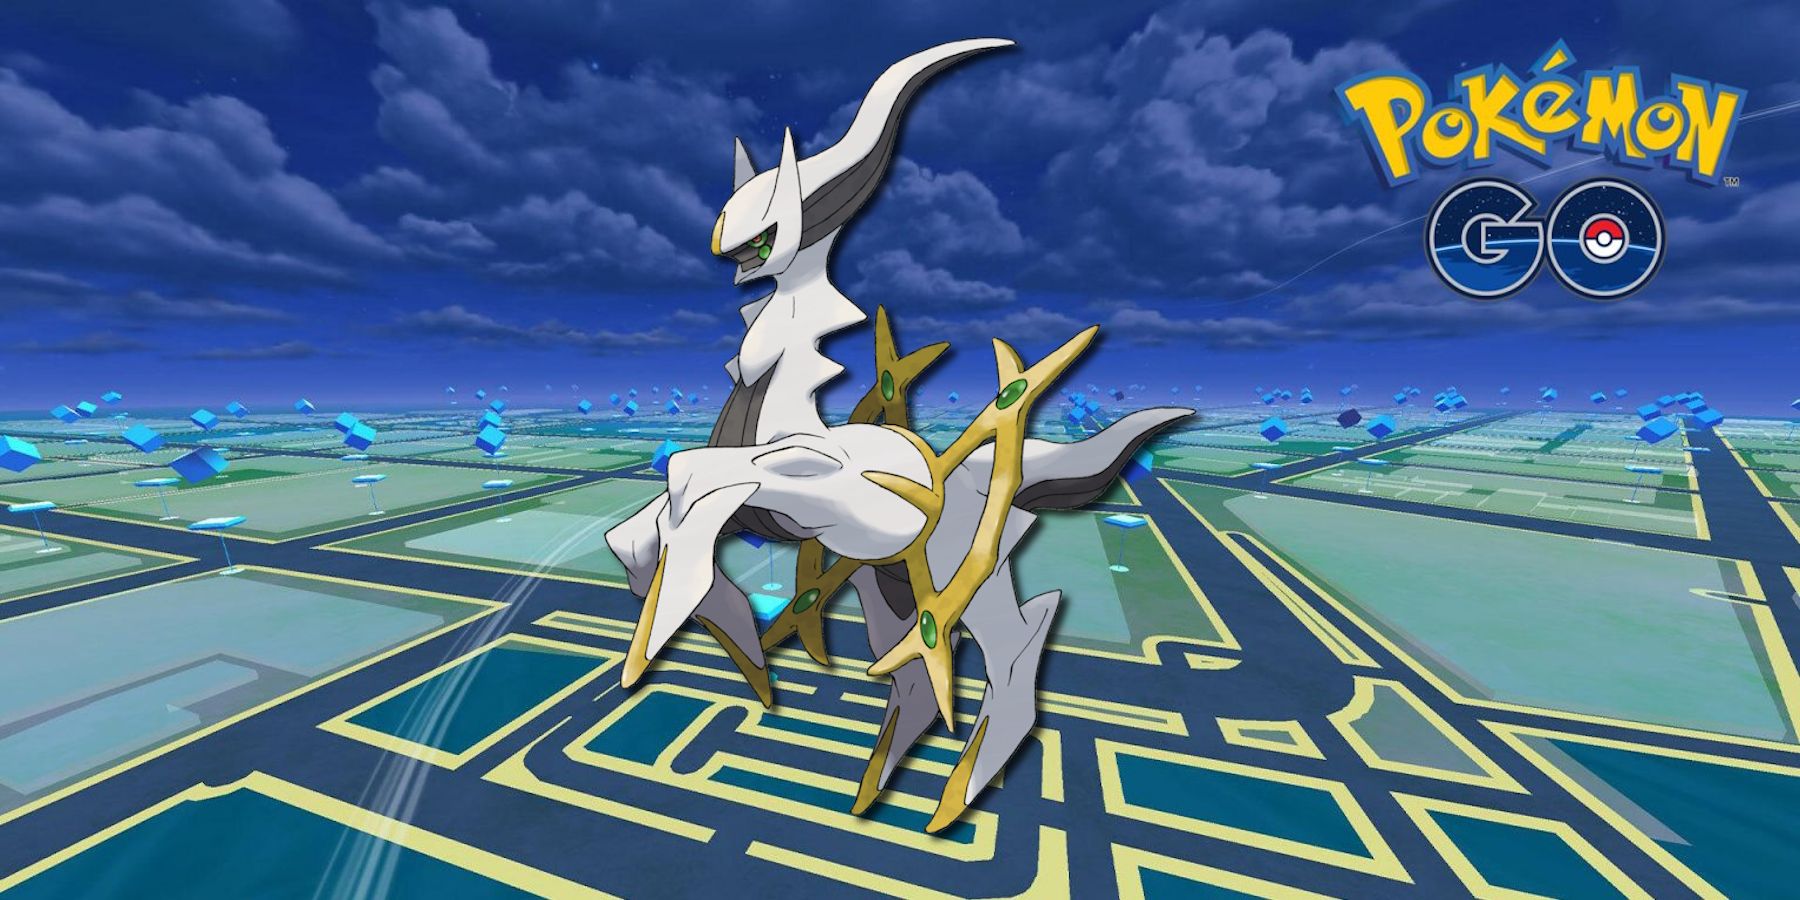 Pokemon Go Players Want a Legends Arceus Feature Added to the Game